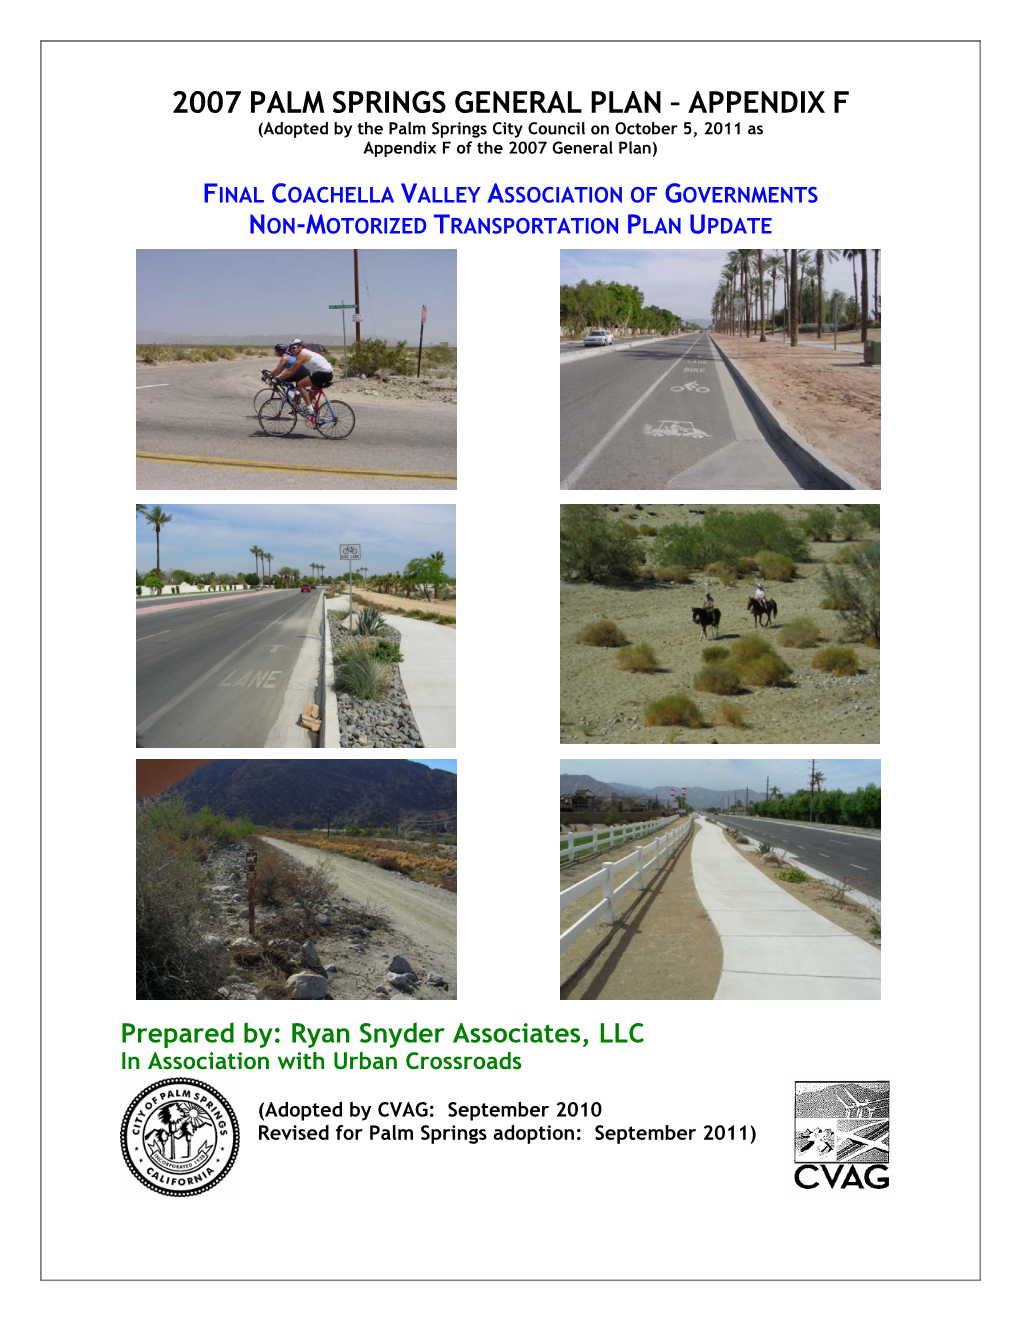 2007 PALM SPRINGS GENERAL PLAN – APPENDIX F (Adopted by the Palm Springs City Council on October 5, 2011 As Appendix F of the 2007 General Plan)